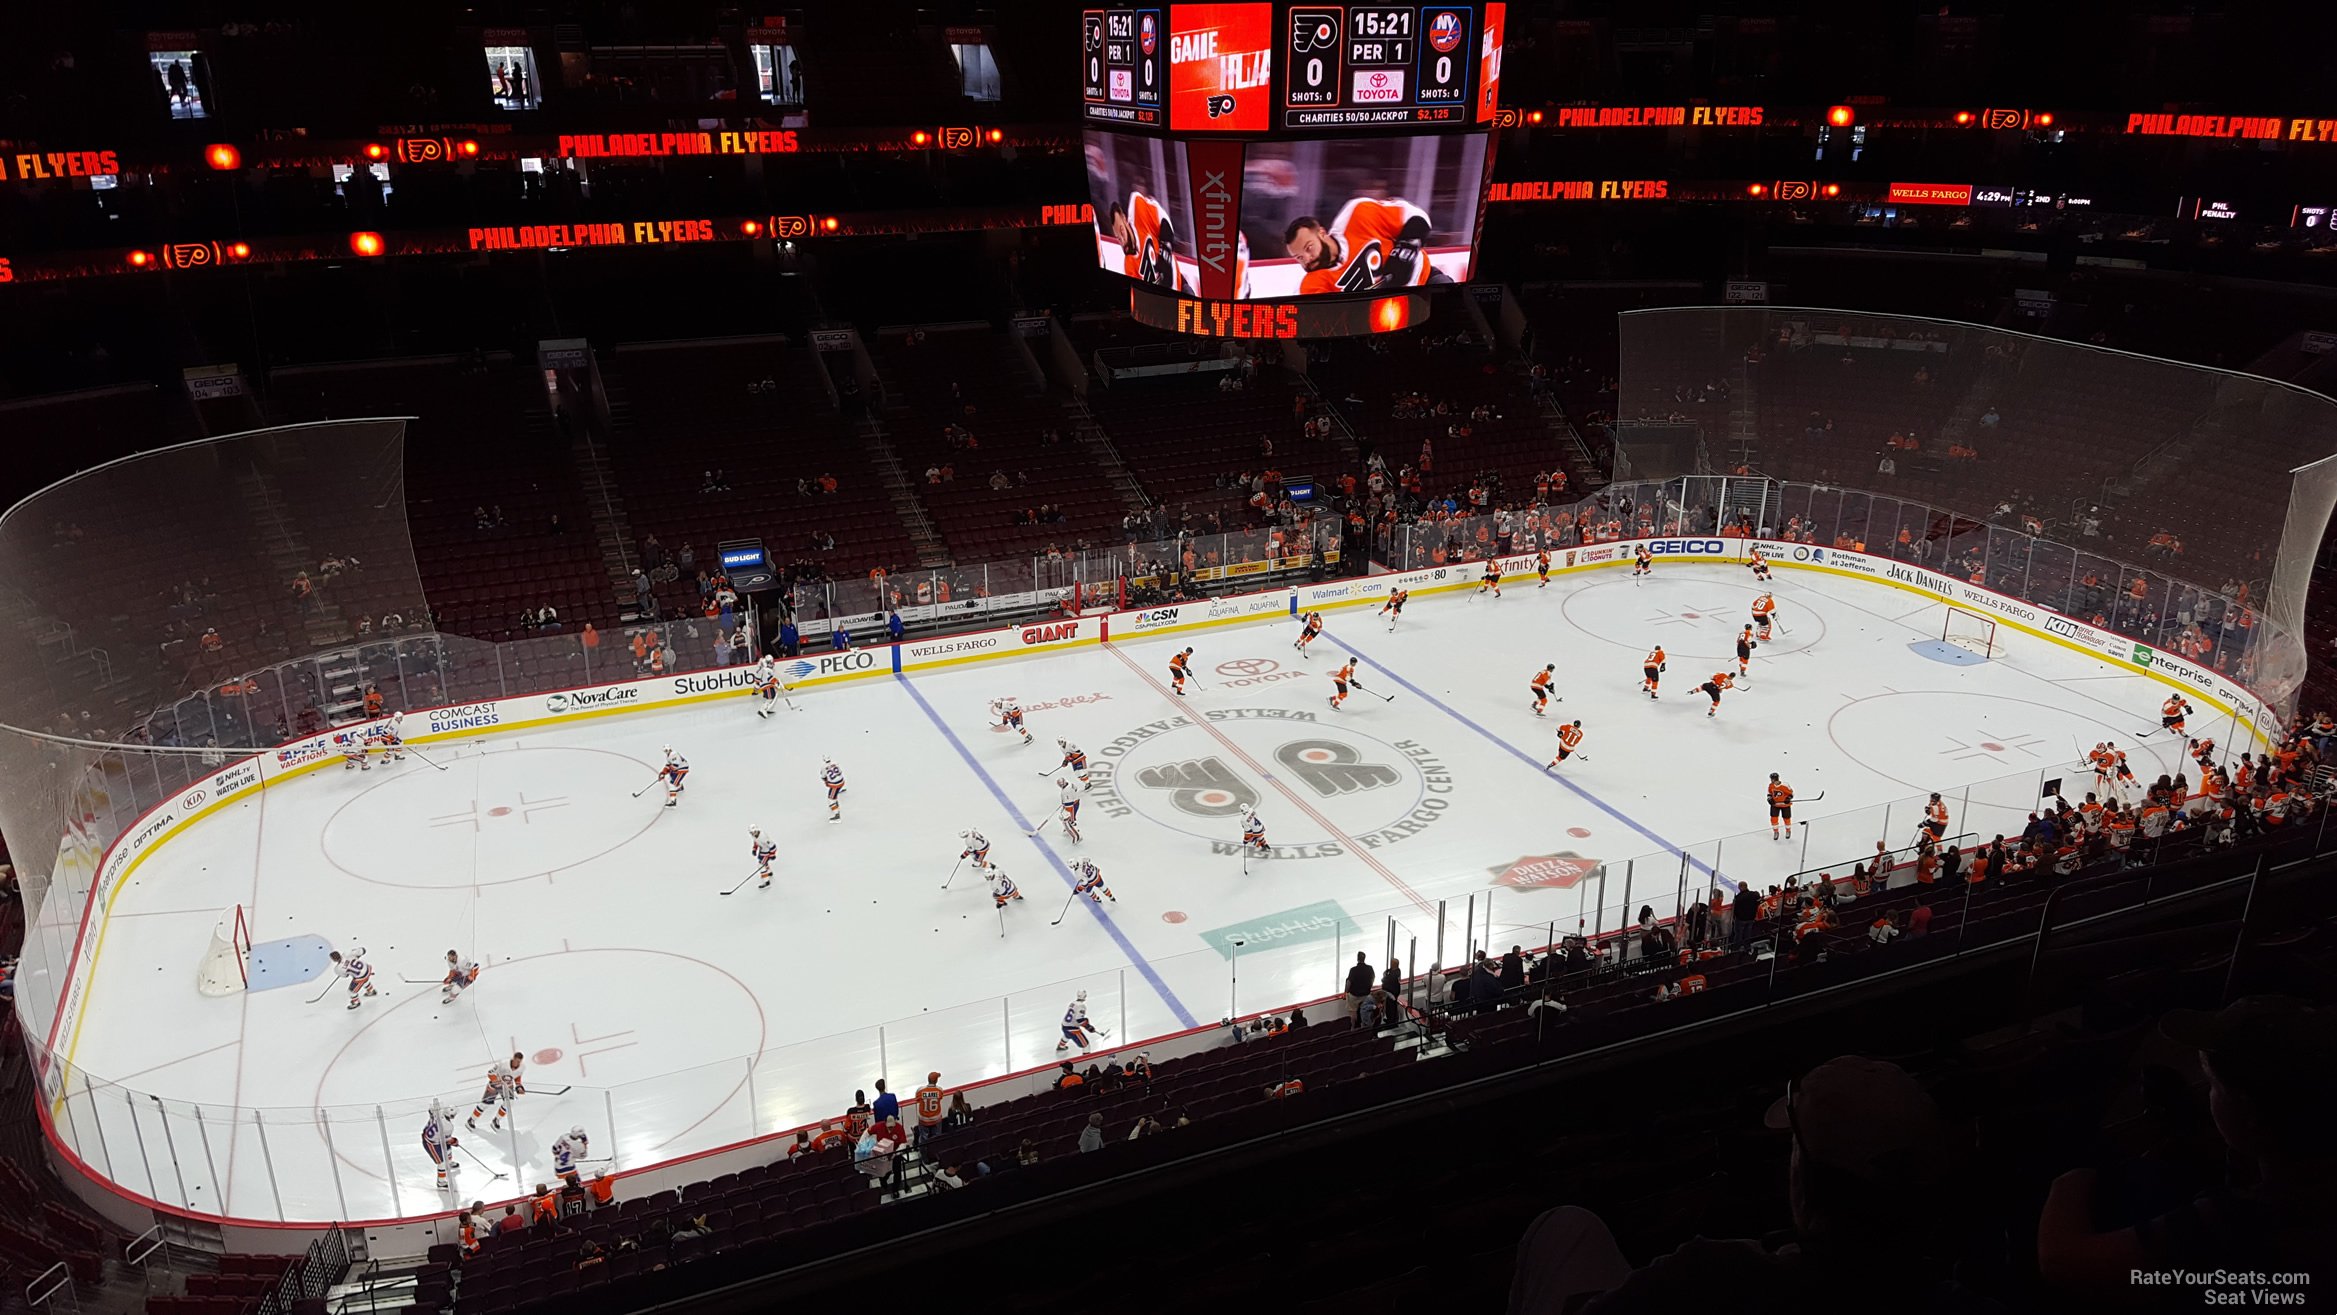 section 211, row 8 seat view  for hockey - wells fargo center